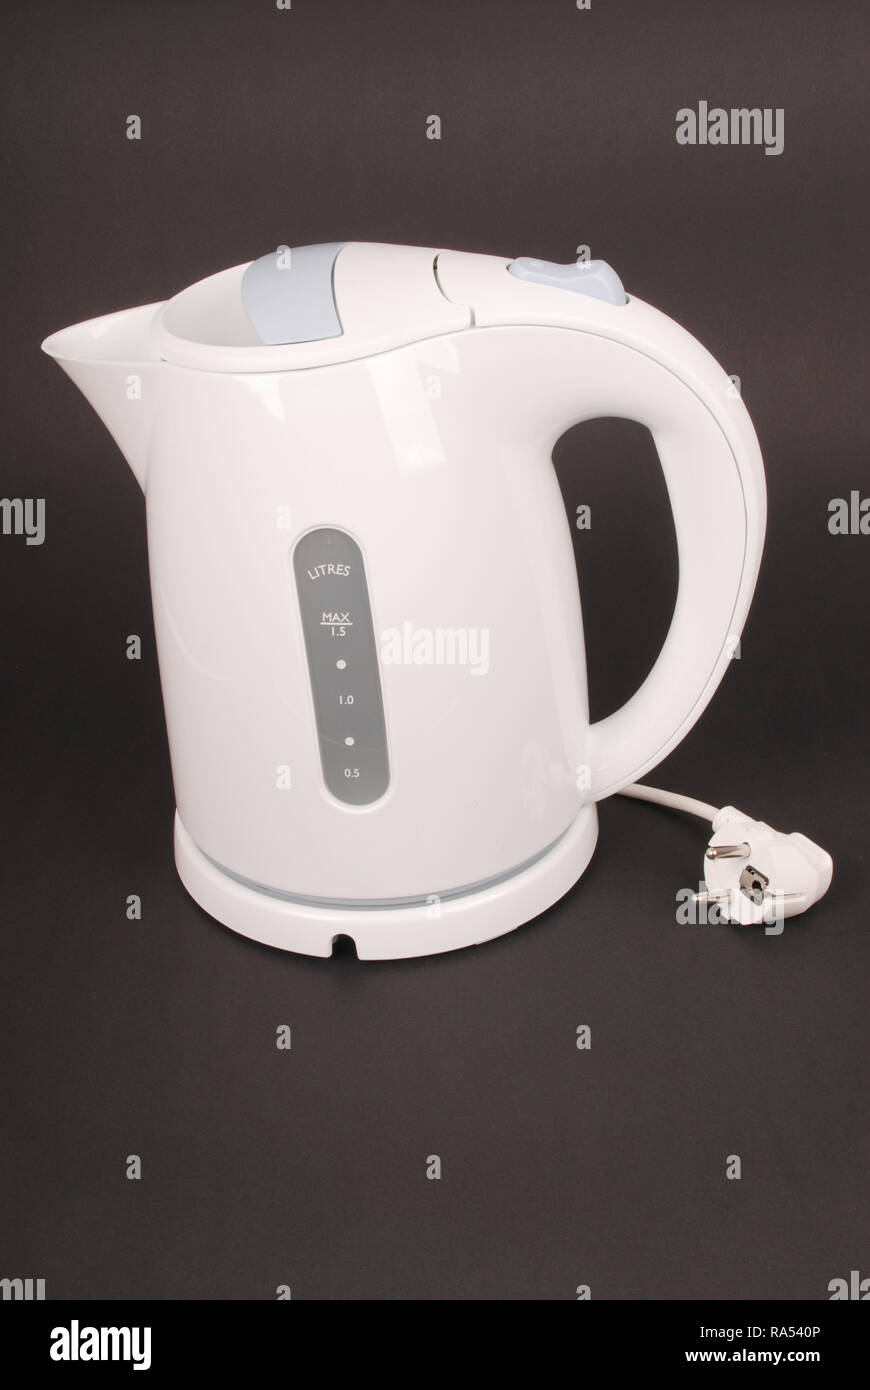 https://c8.alamy.com/comp/RA540P/white-electric-kettle-isolated-on-black-background-RA540P.jpg